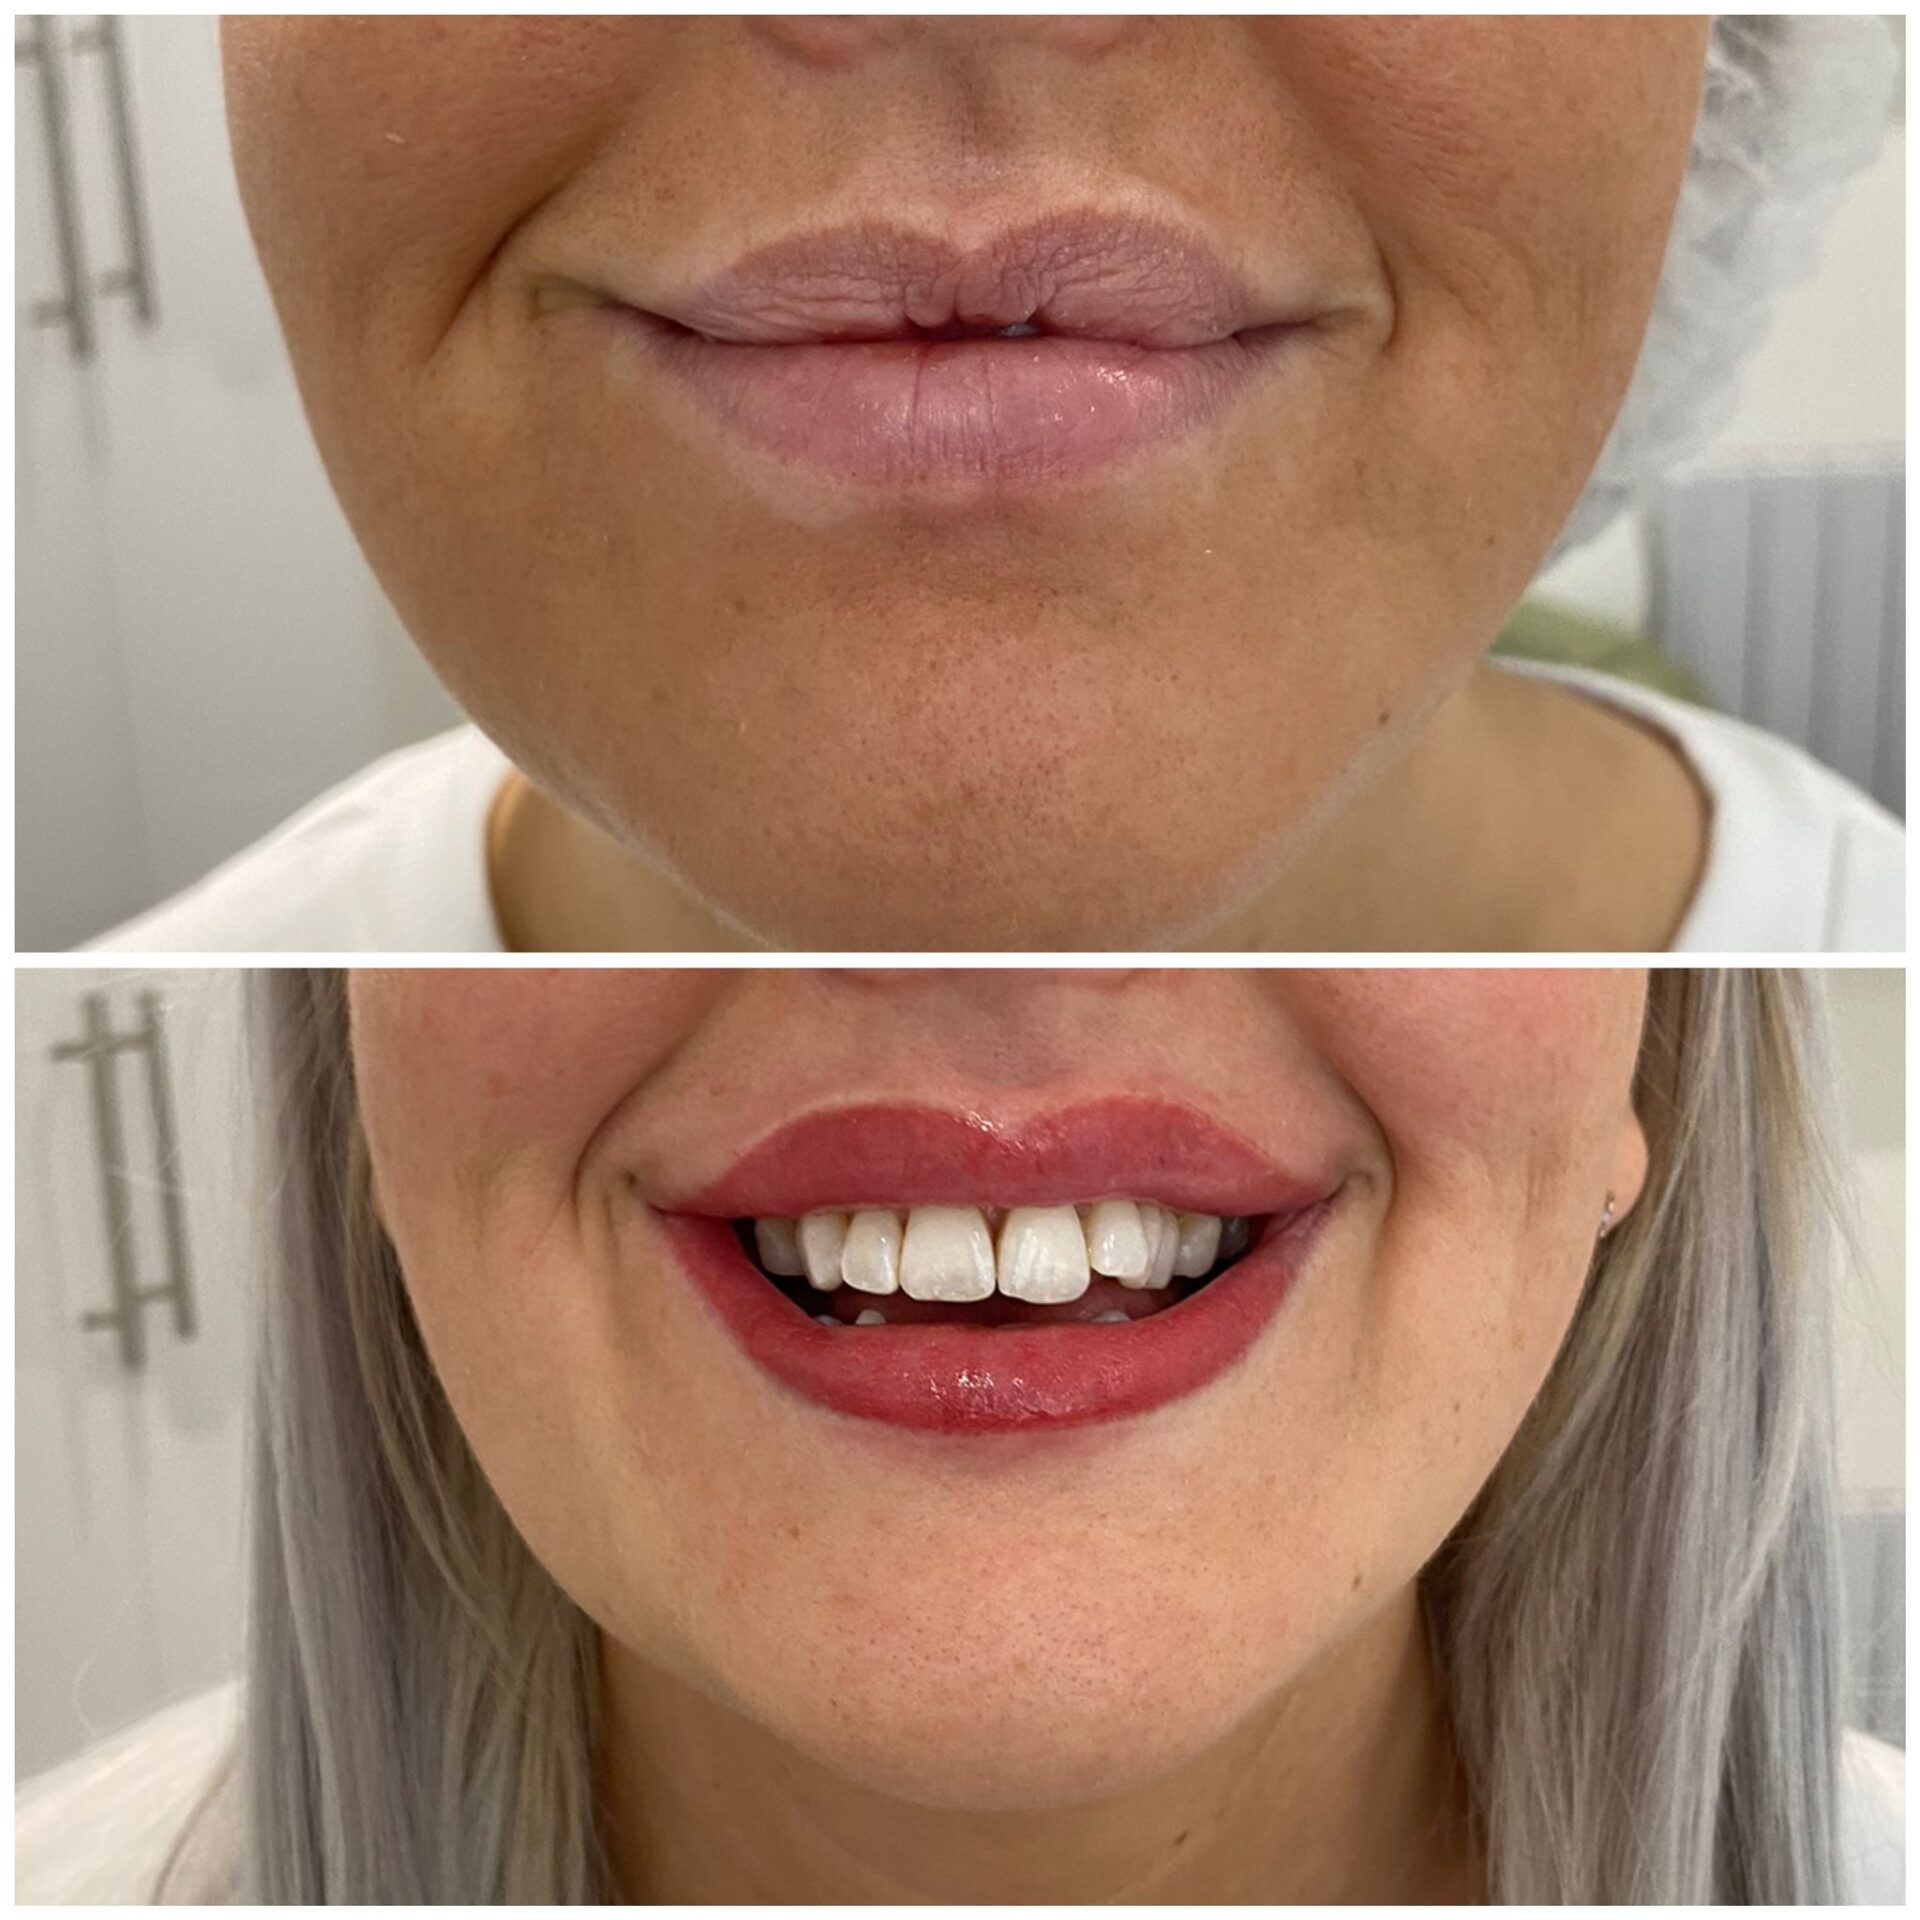 Permanent Lip Liner Before and After Photos - Ruth Swissa